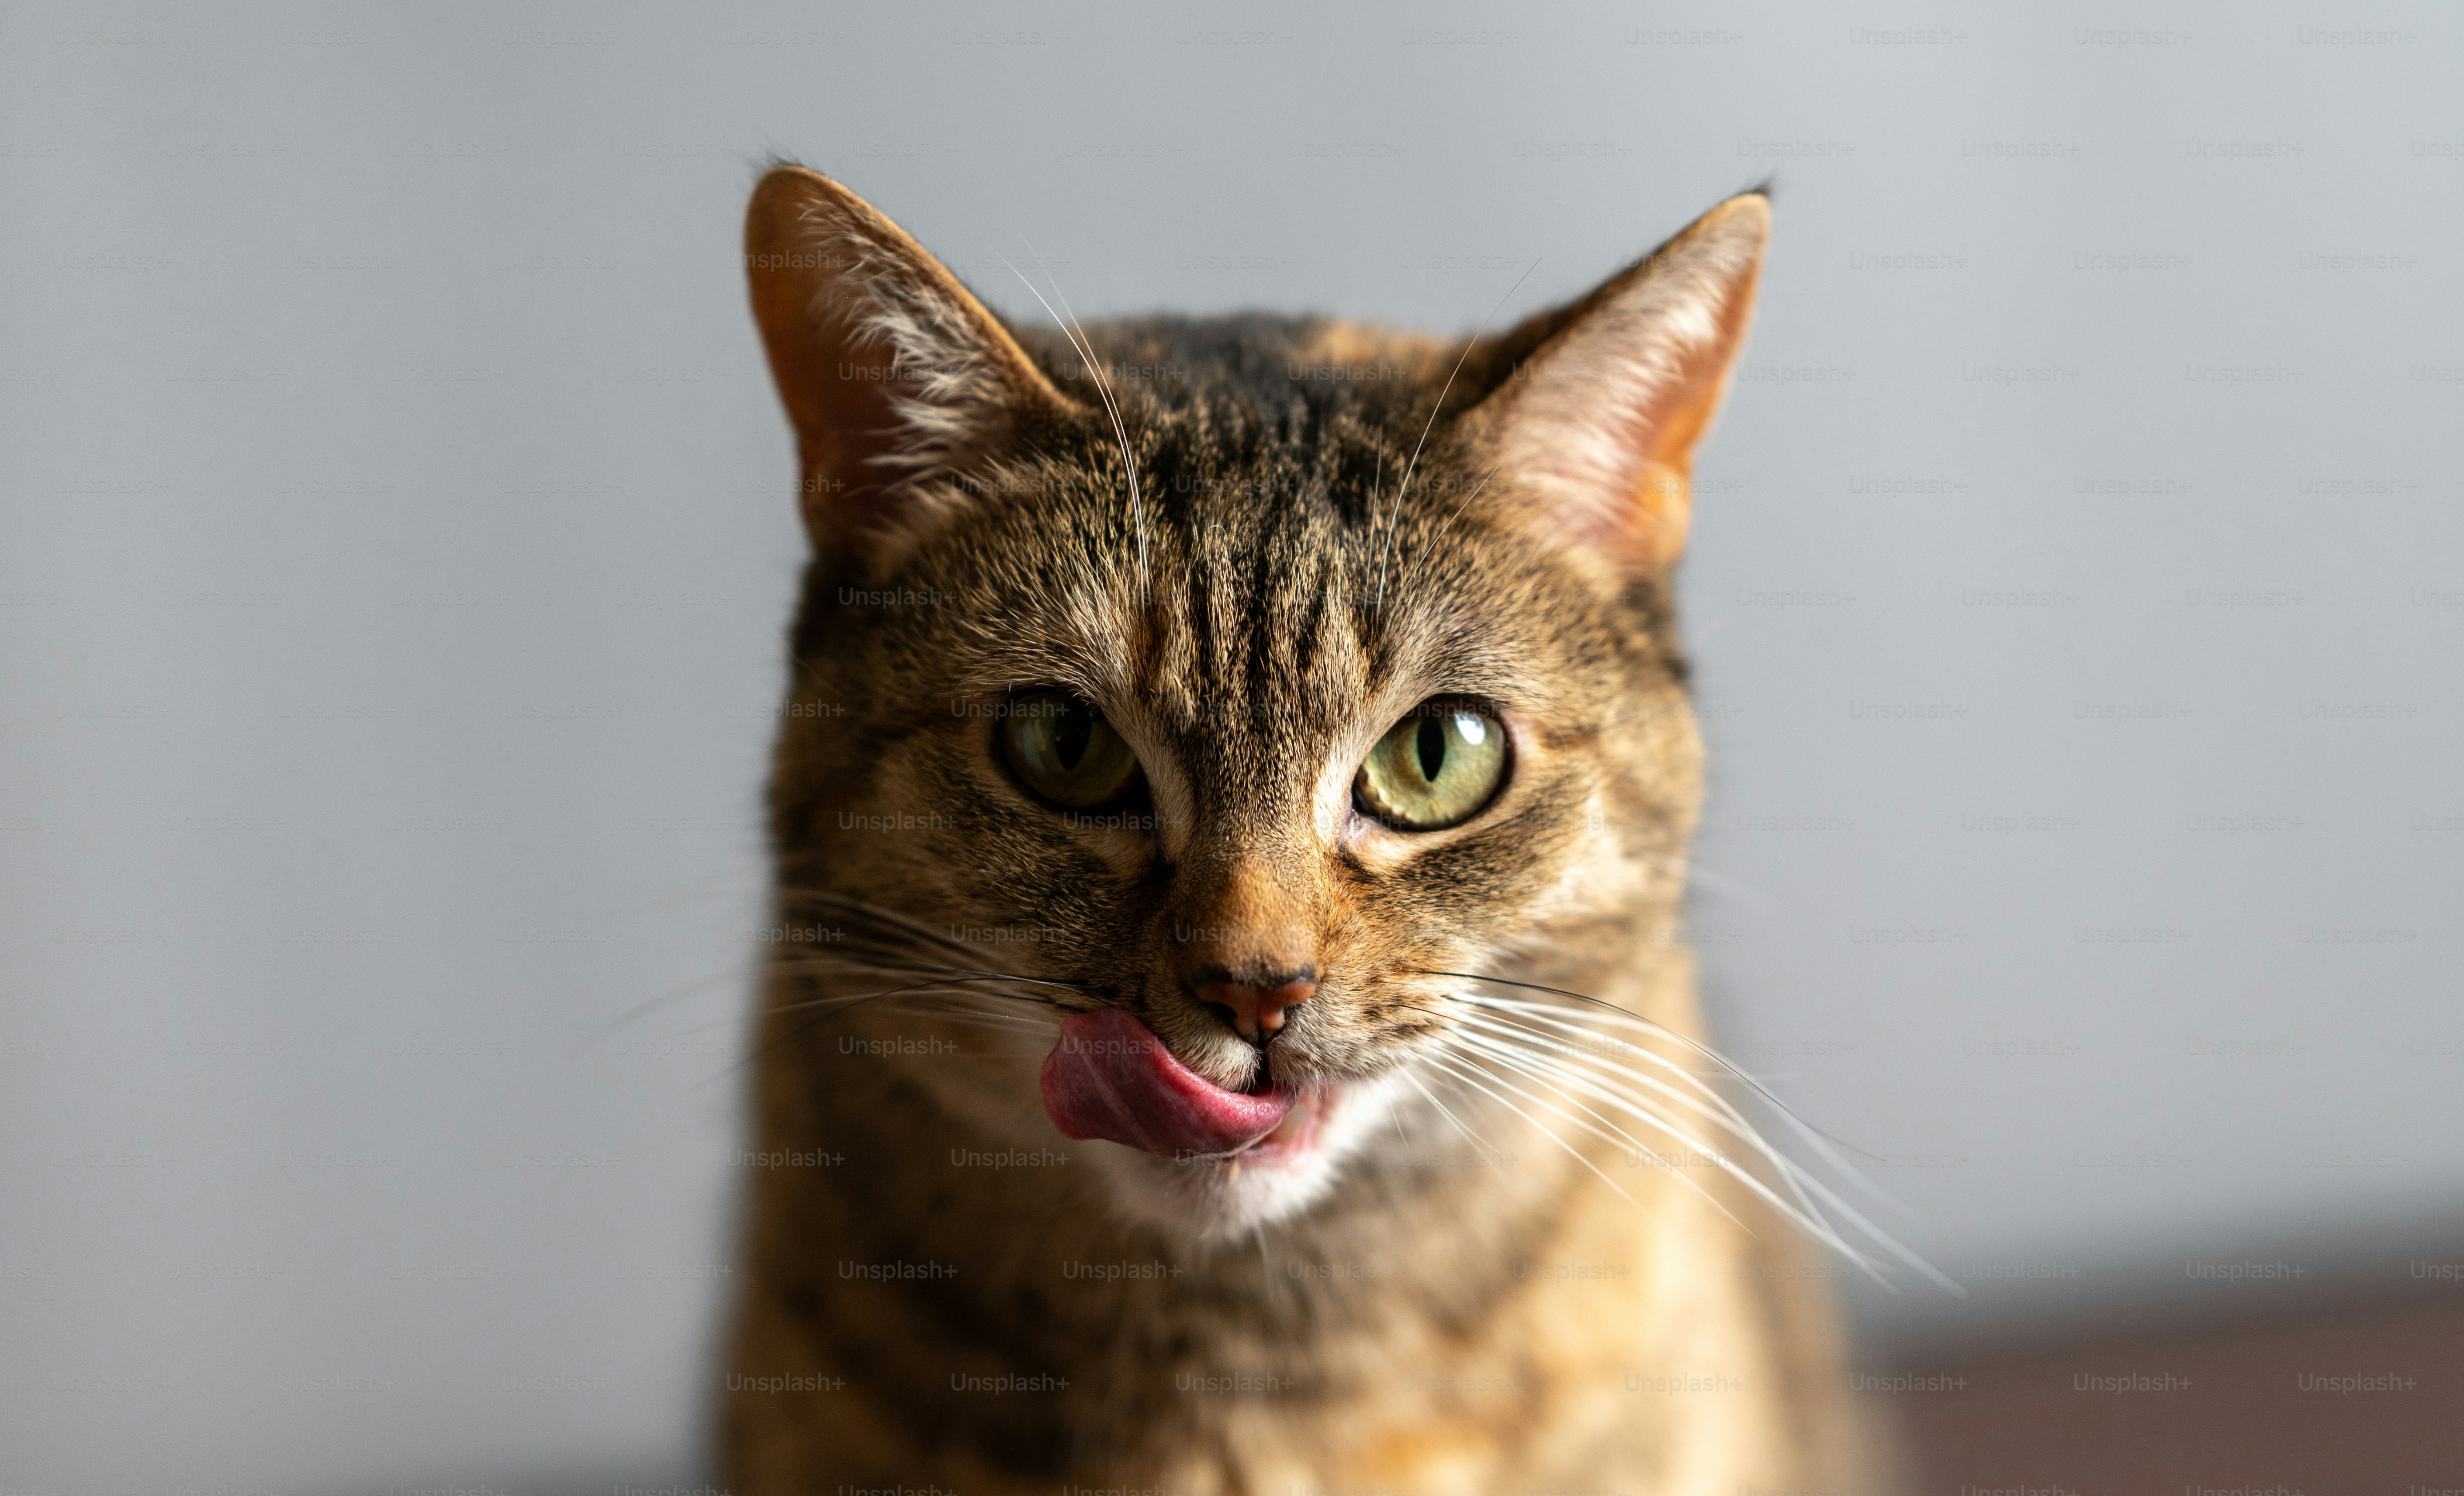 9 lives isn't enough to capture the amazing-ness of cats. You need high-quality, professionally photographed images to do that. Unsplash's collection of cat images capture the wonder of the kitty in high-definition, and you can use these images however you wish for free.